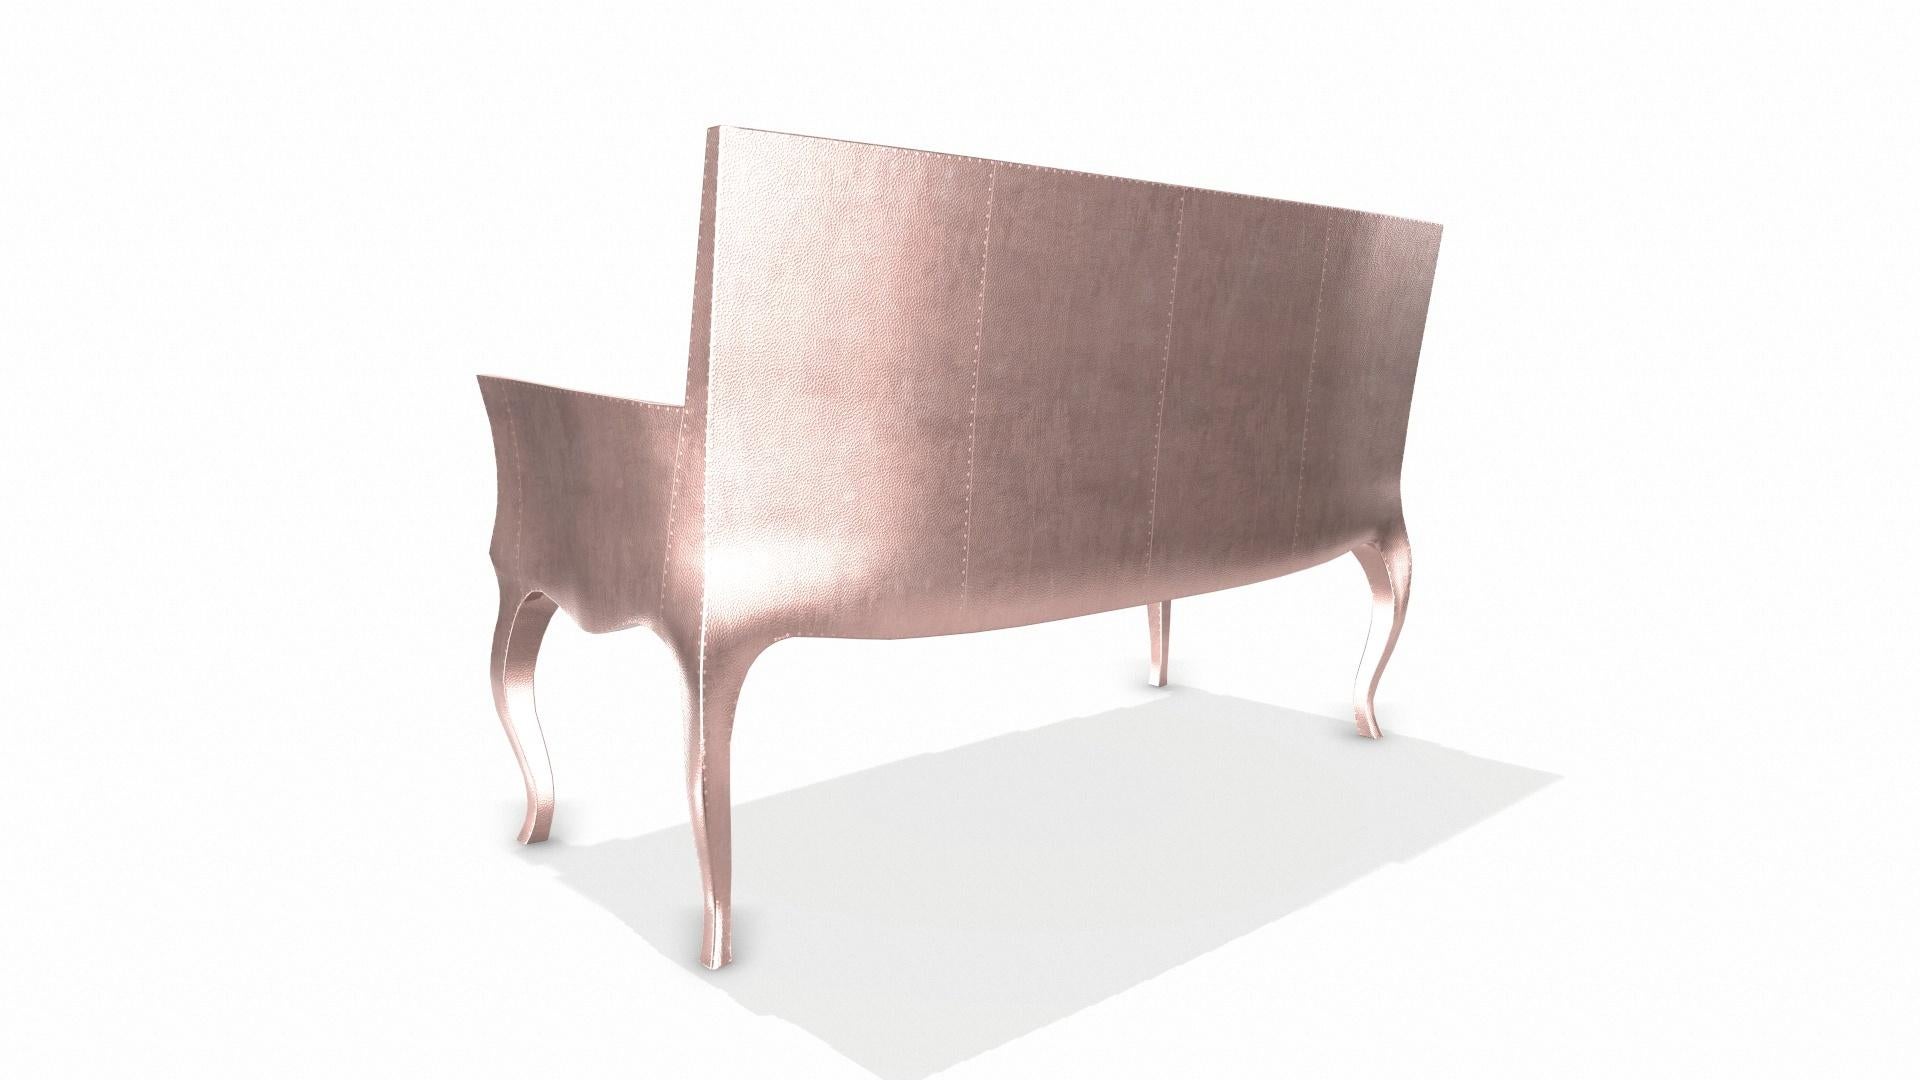 Louise Settee Art Deco Benches in Mid. Hammered Copper by Paul Mathieu For Sale 1